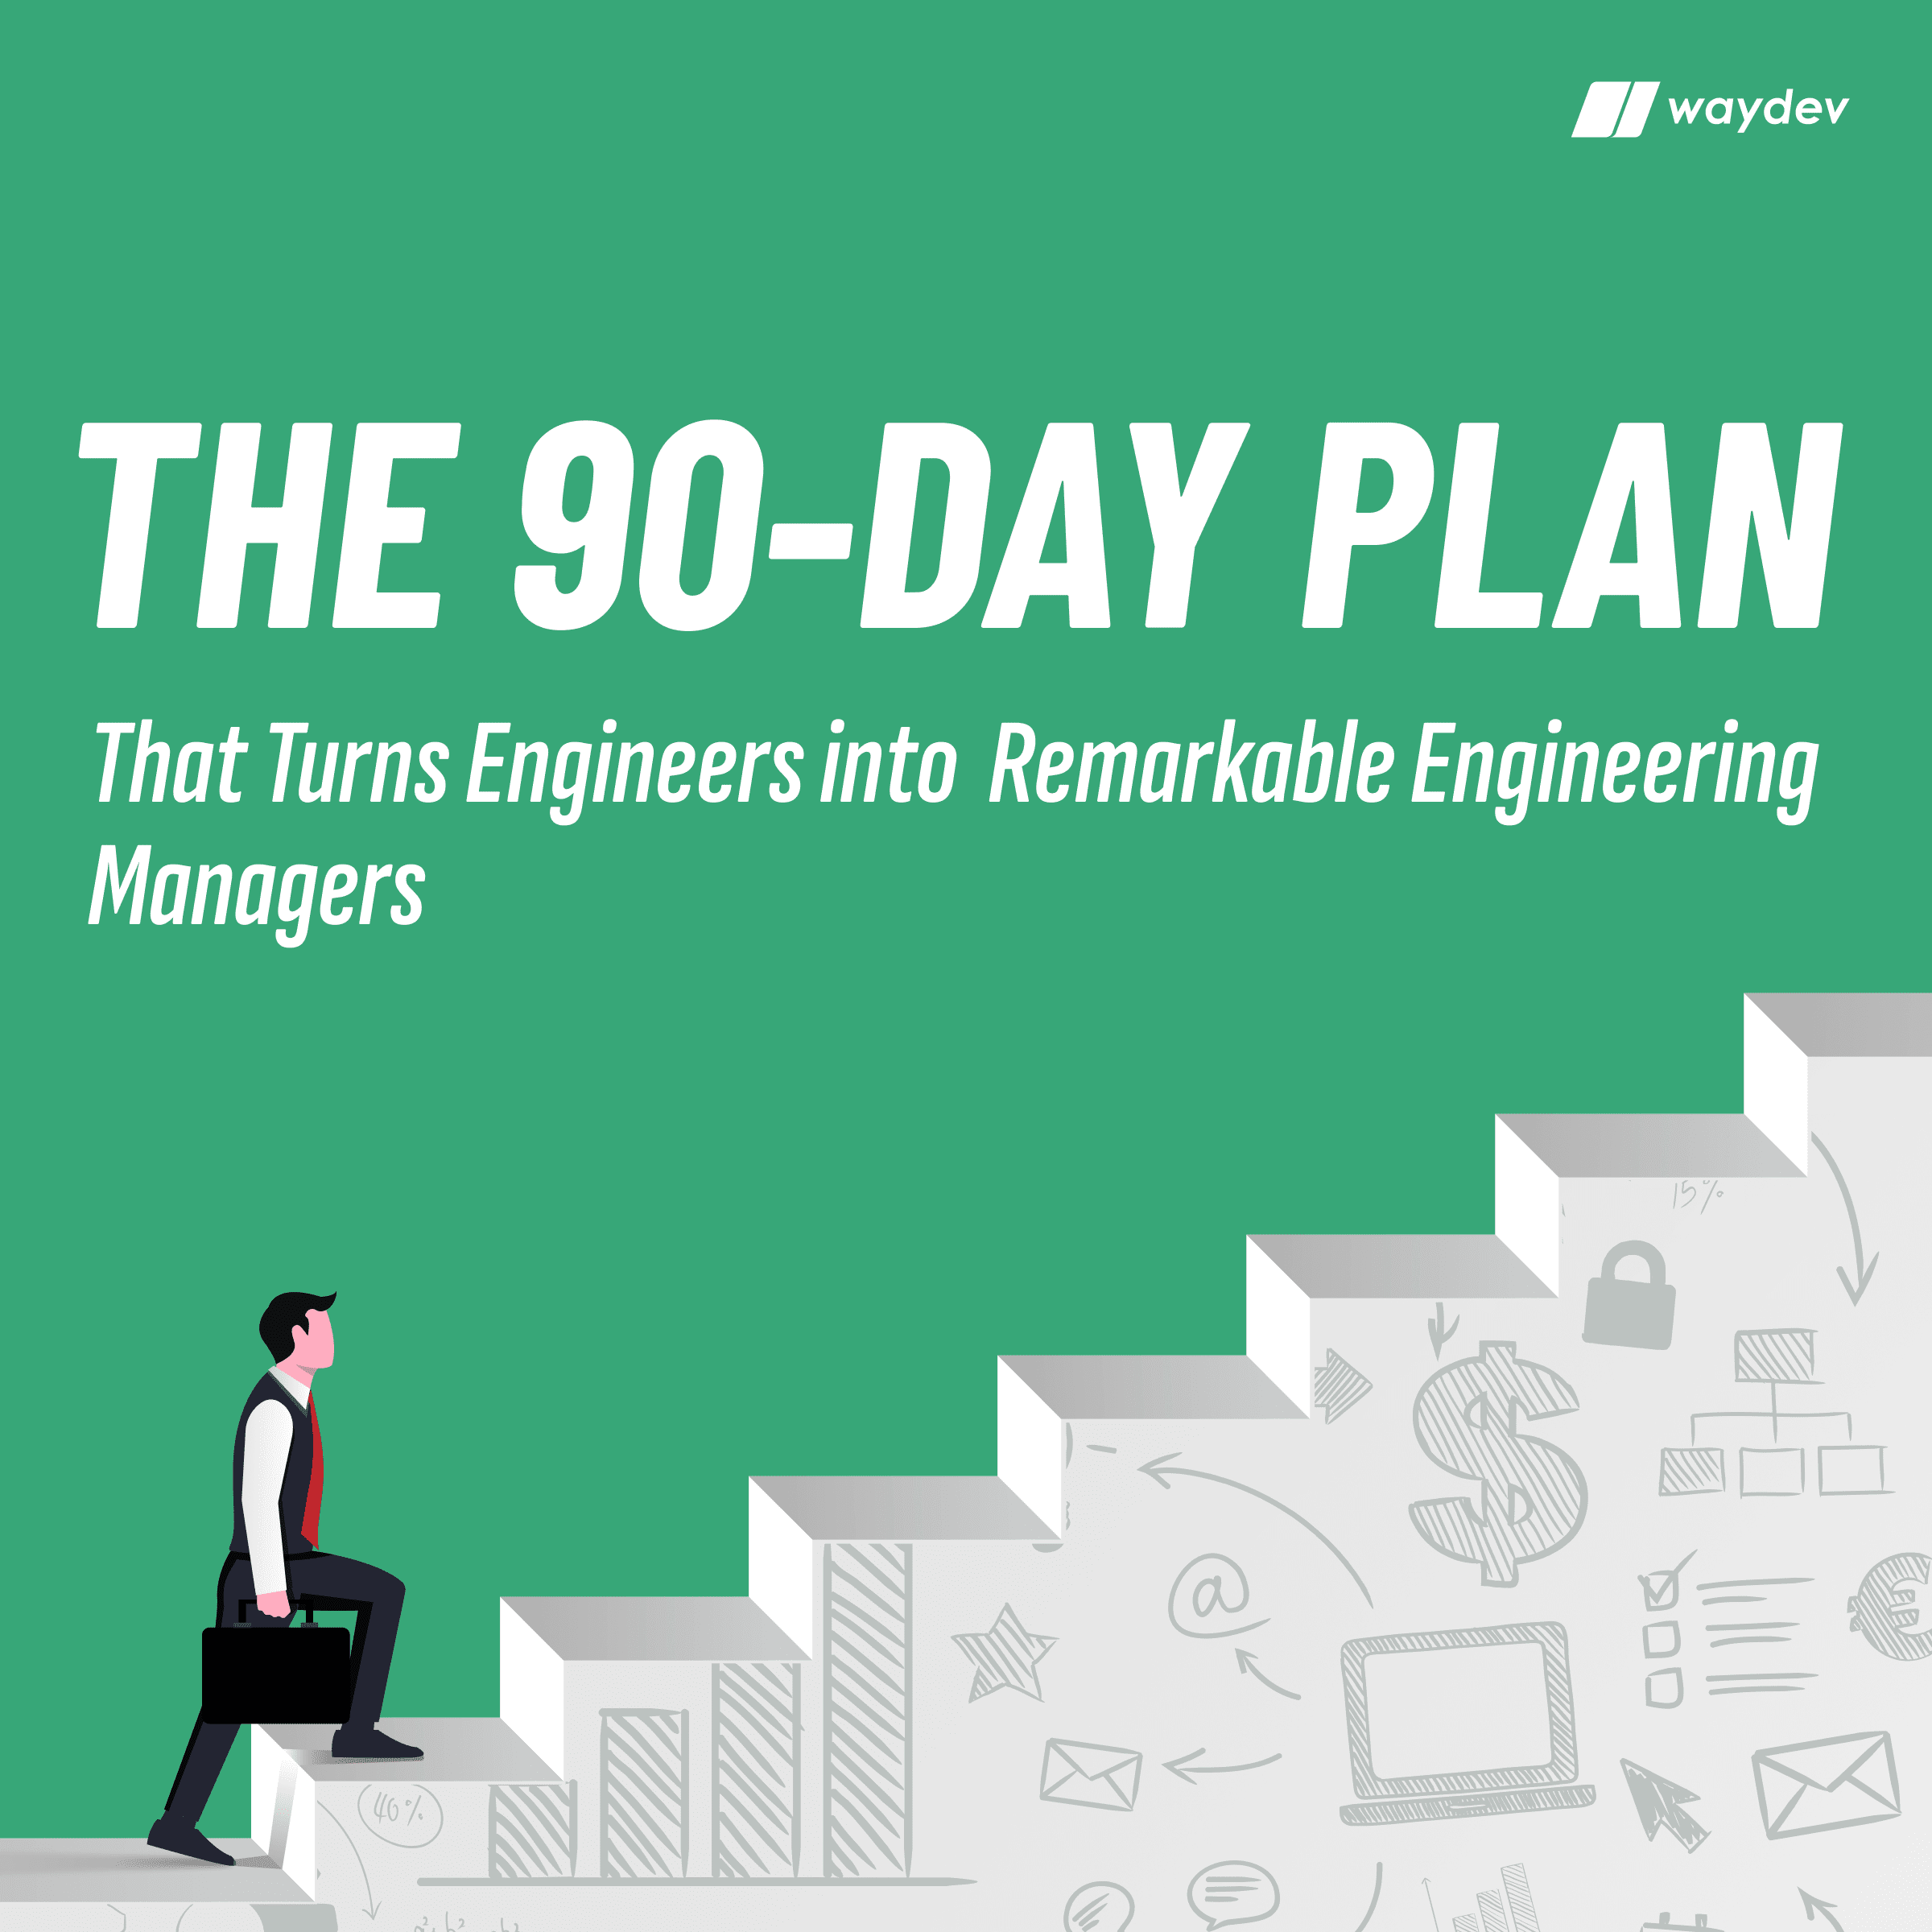 The 90-Day Plan That Turns Engineers into Remarkable Engineering Managers